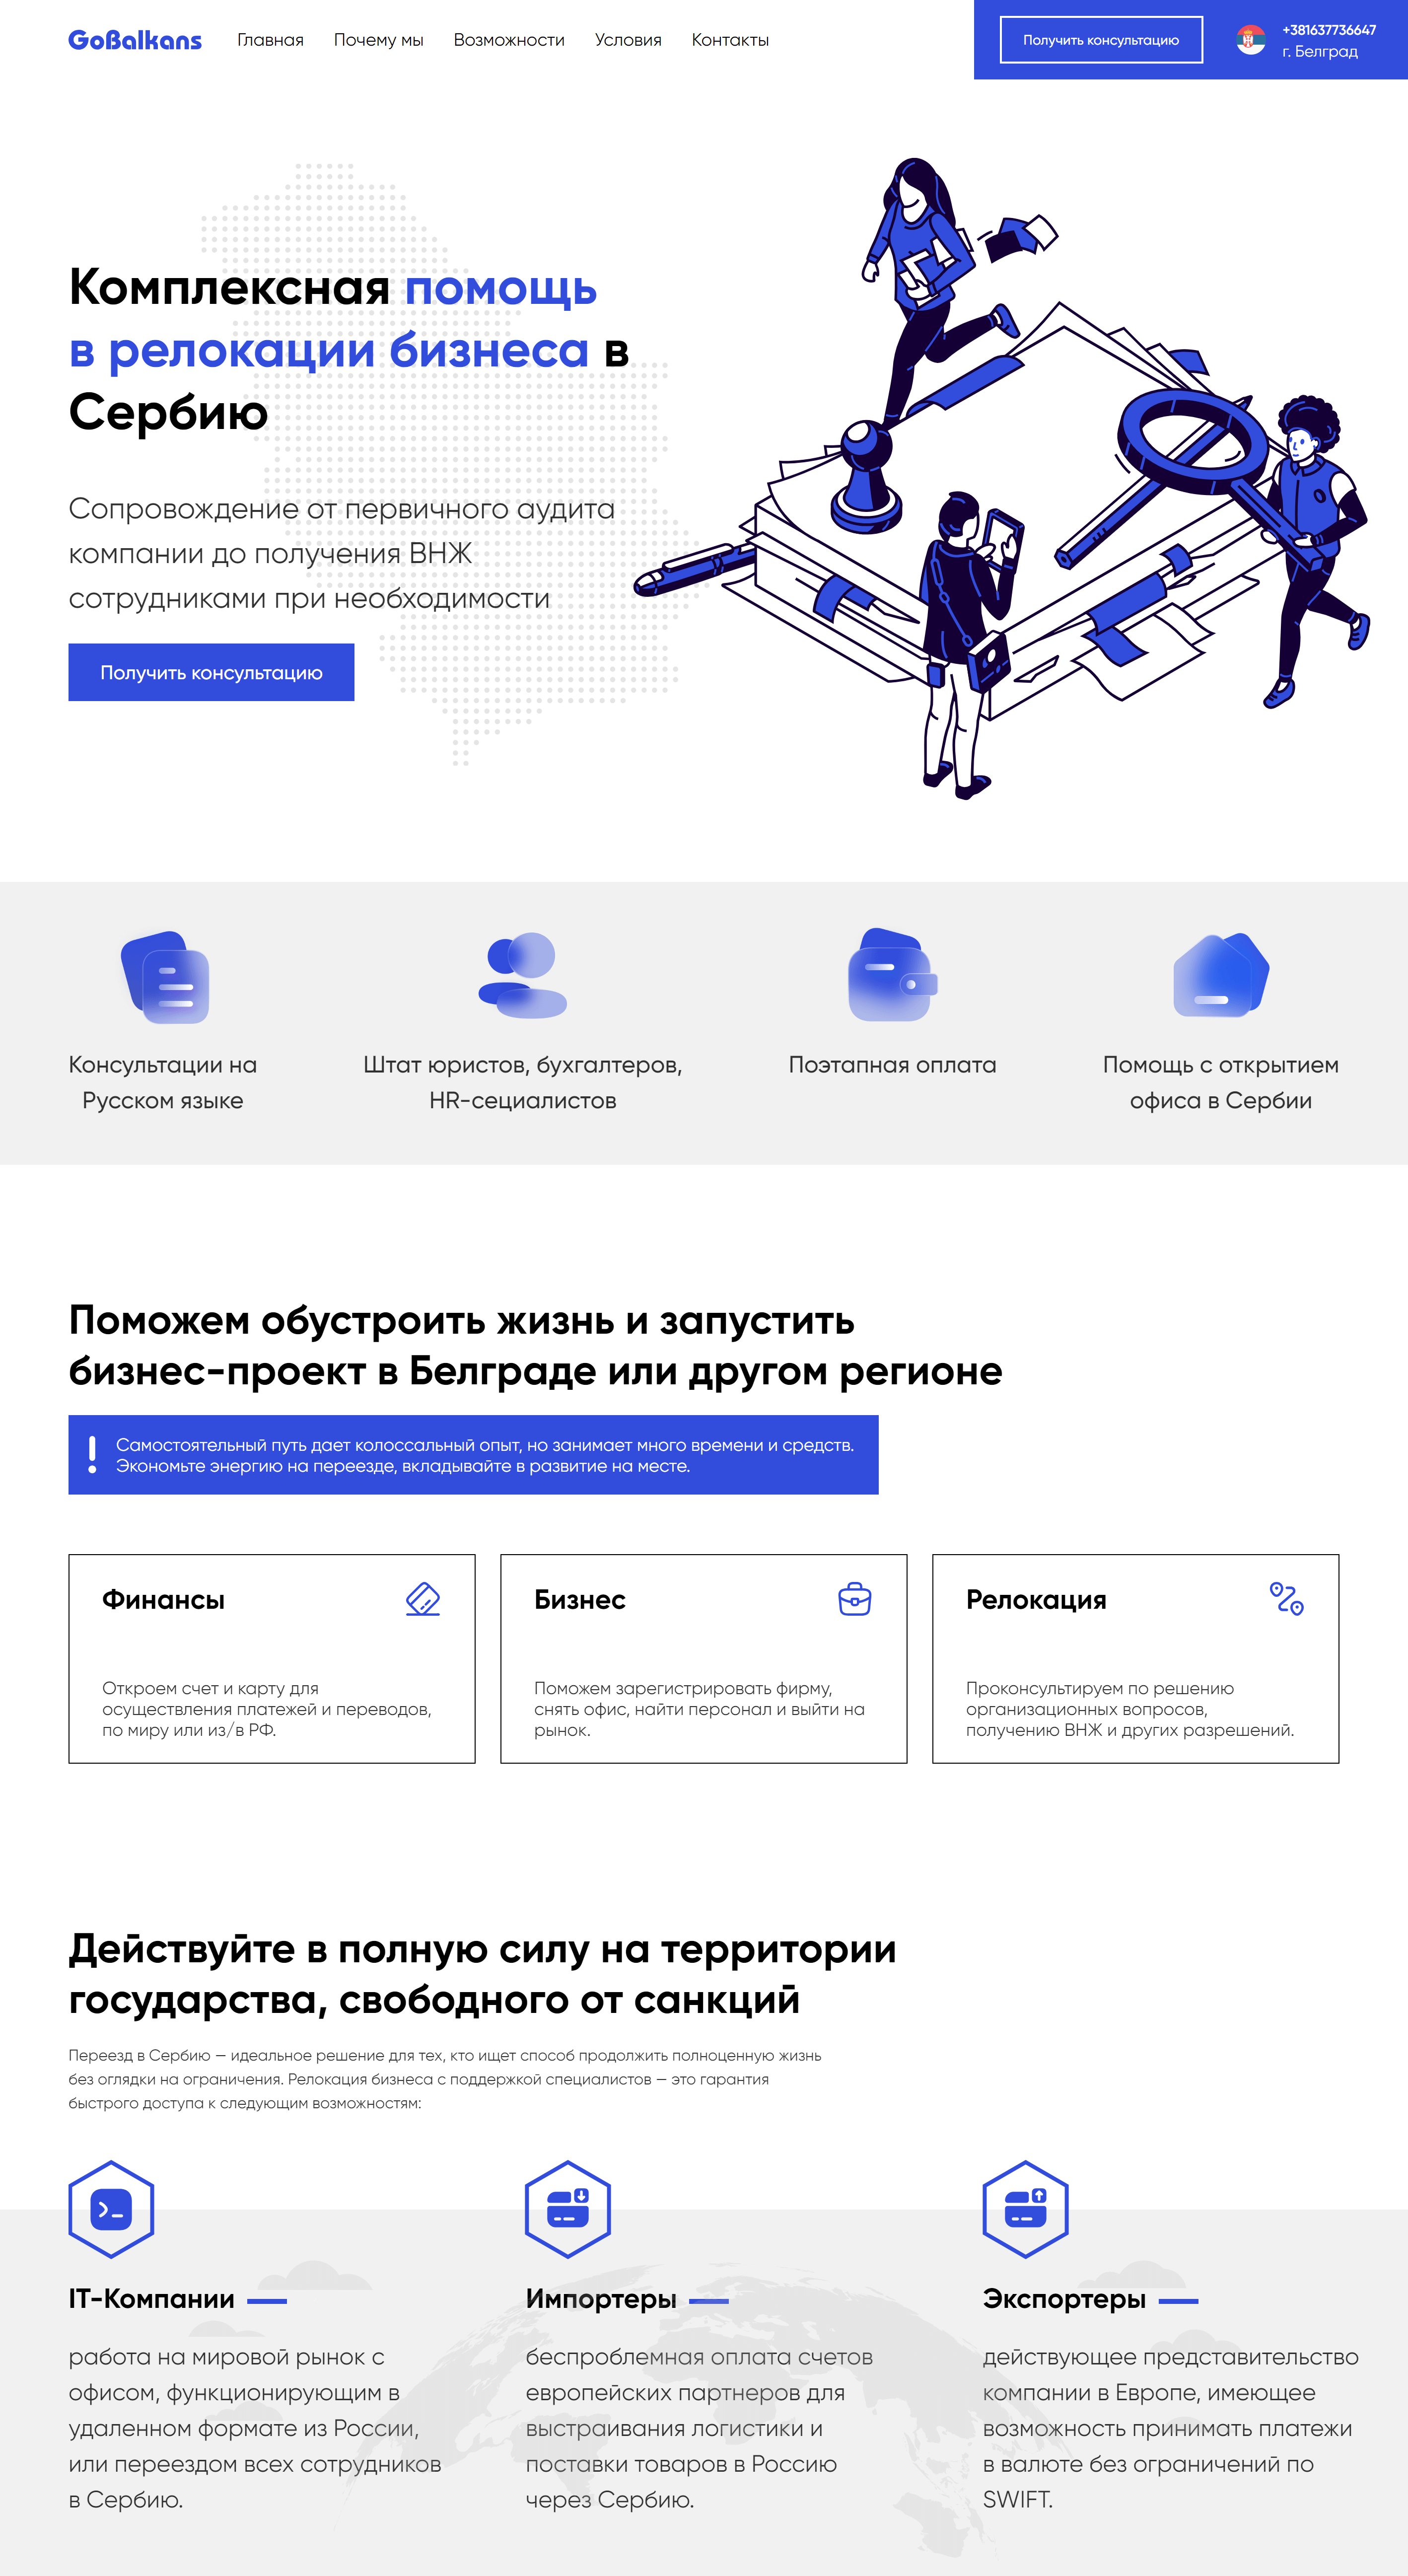 GoBalkans landing page attracting attention with its unique style